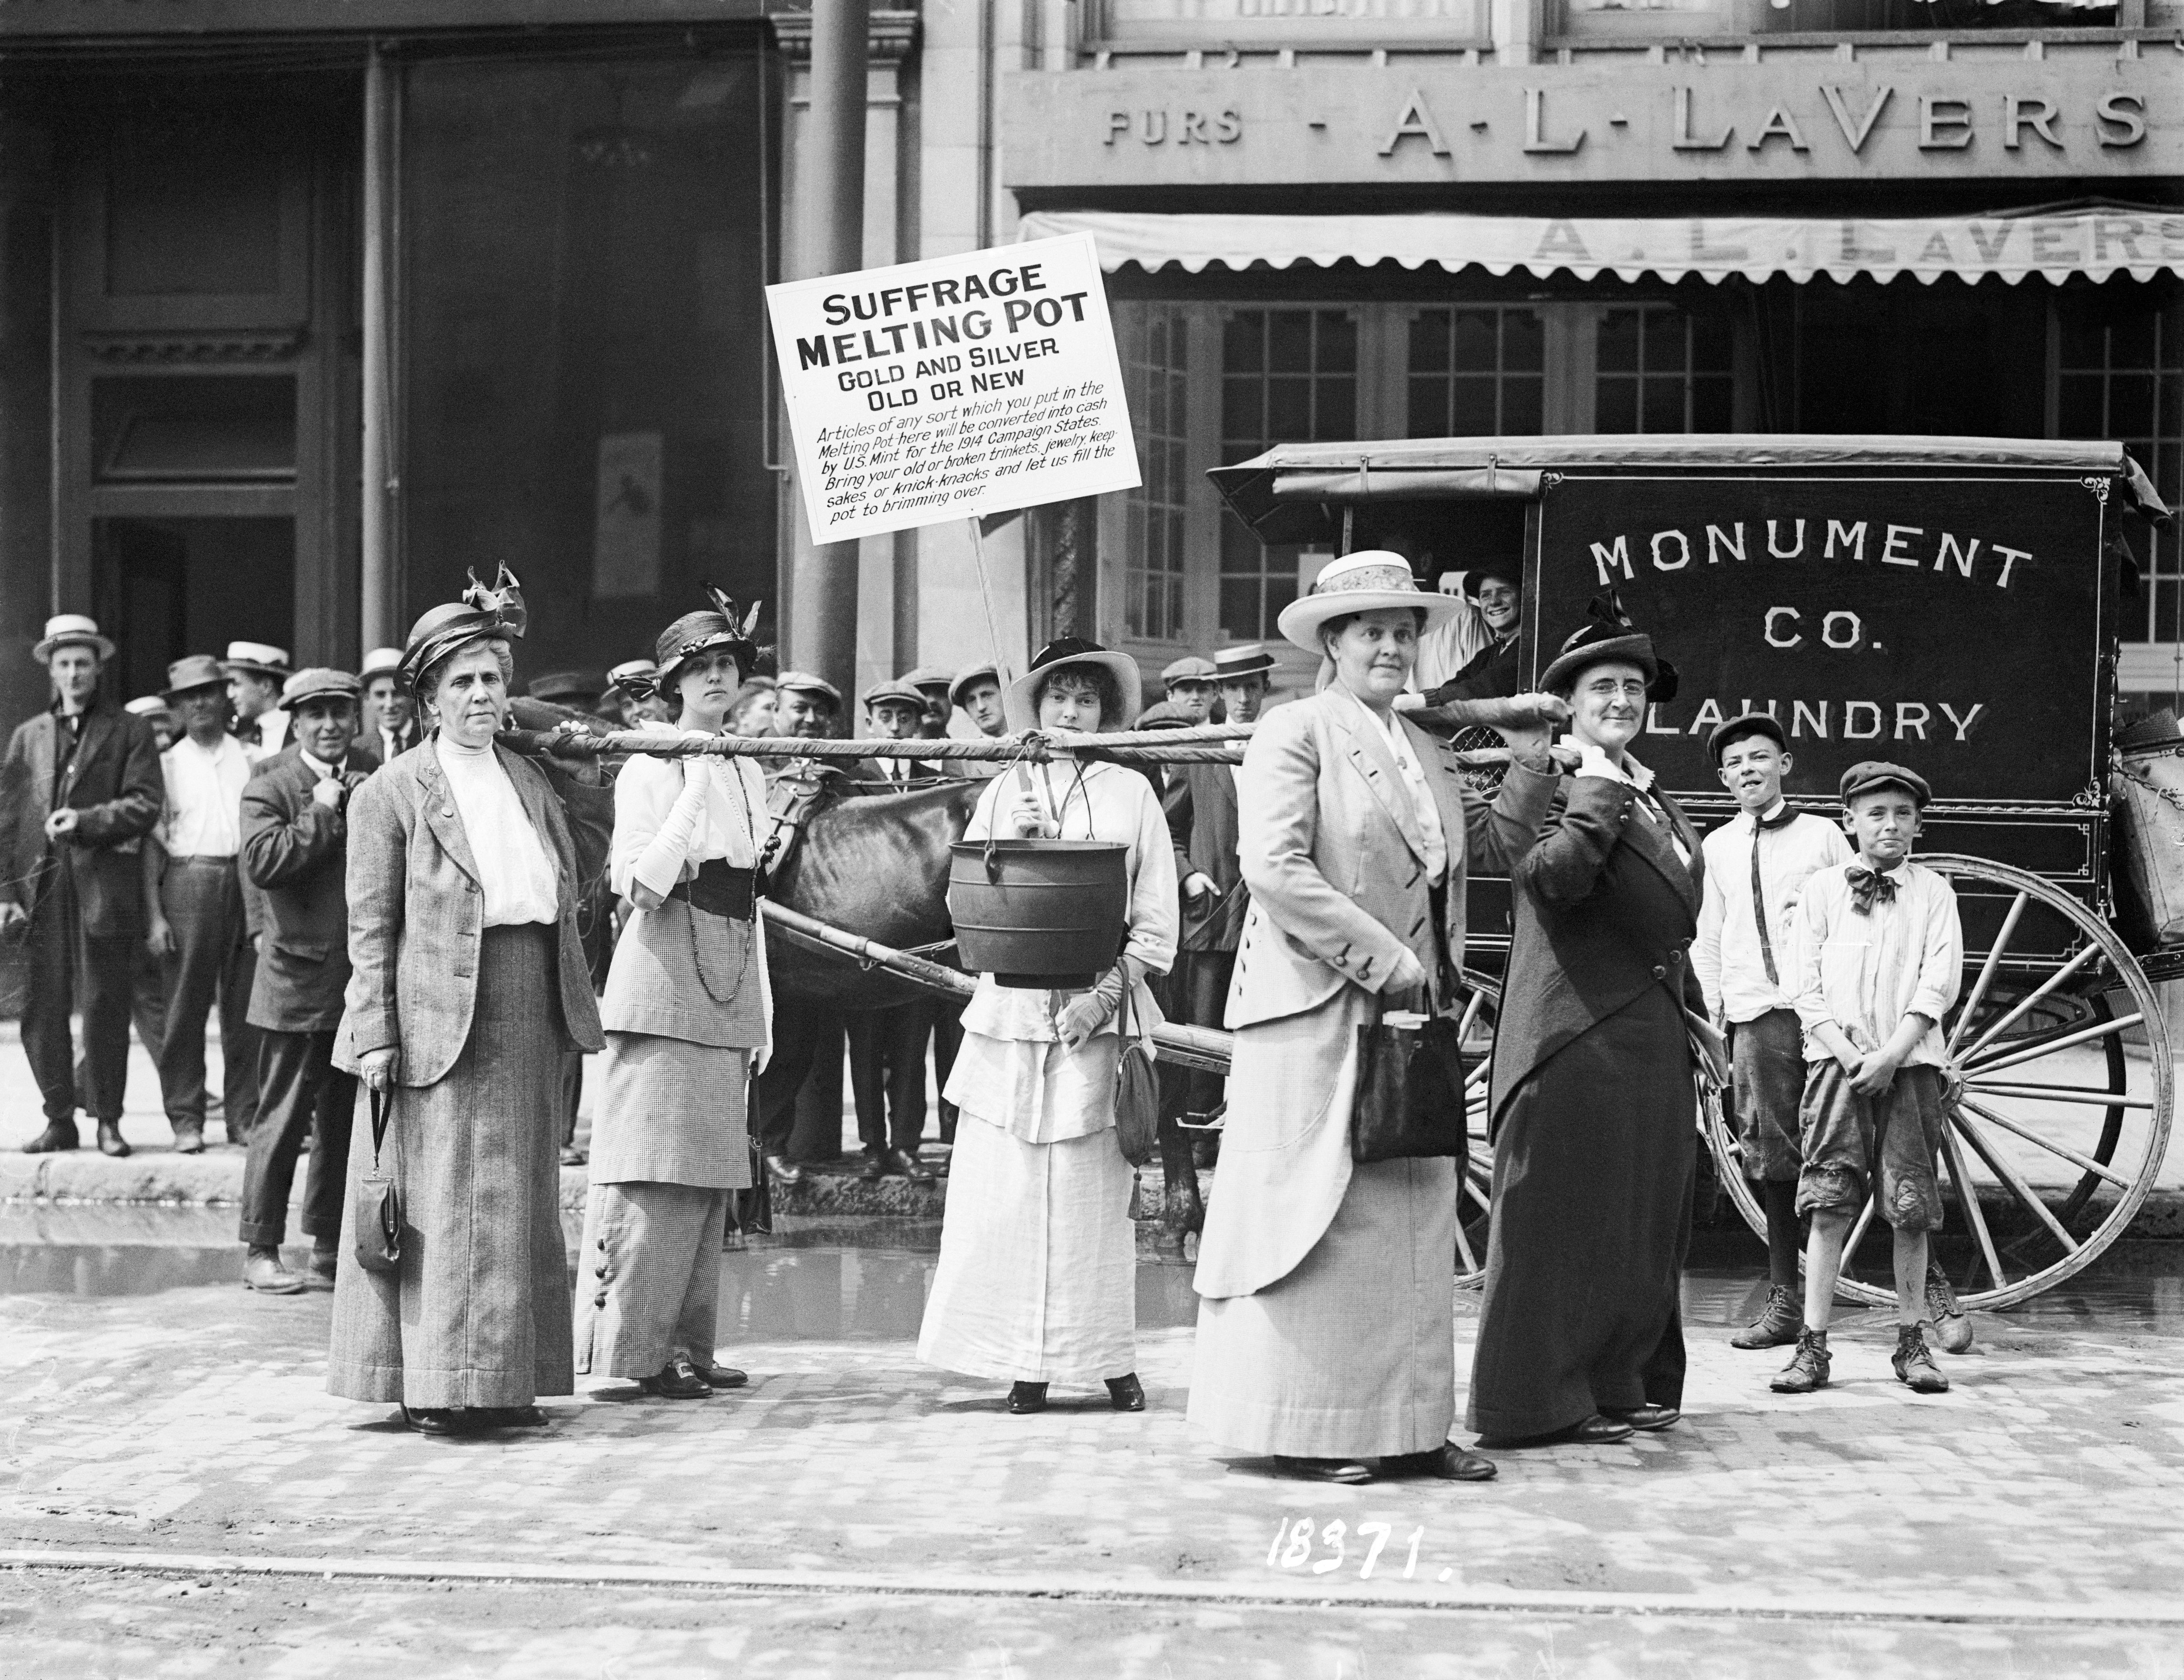 More than 50,000 women registered to vote in Boston 100 years ago: City  archives look back at the suffrage movement - The Boston Globe